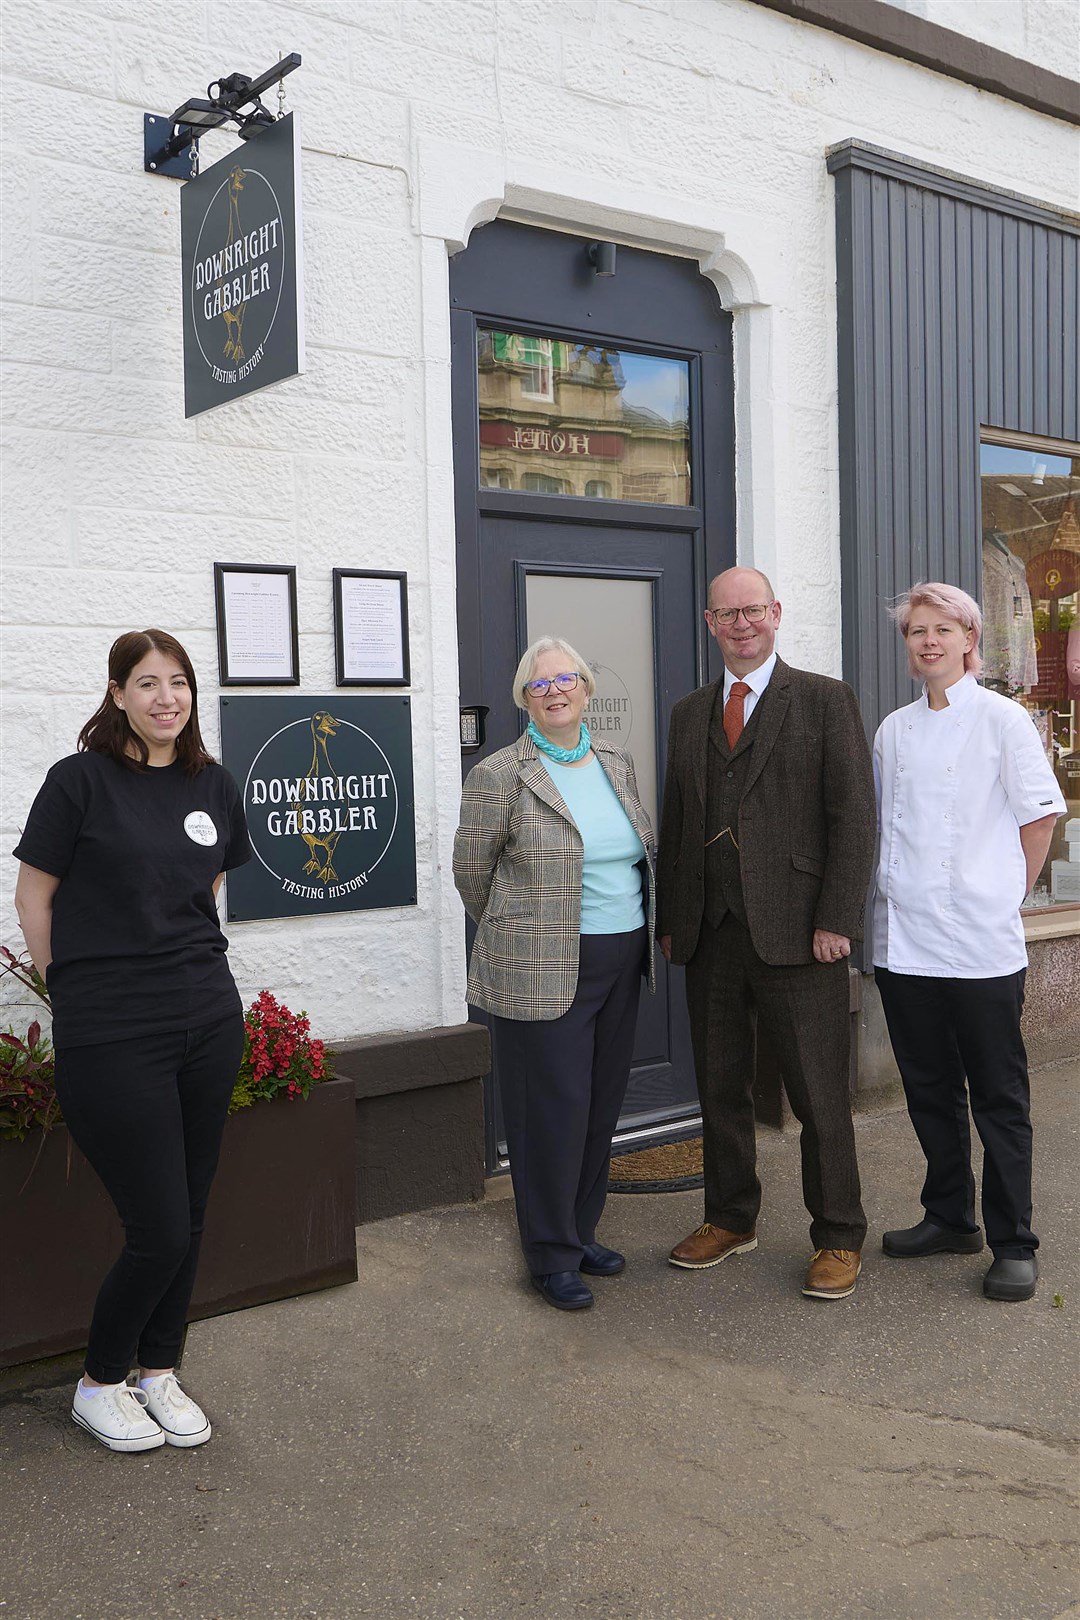 Jane Cumming (second from left) of Downright Gabbler in Beauly made interesting new business connections through the virtual event.